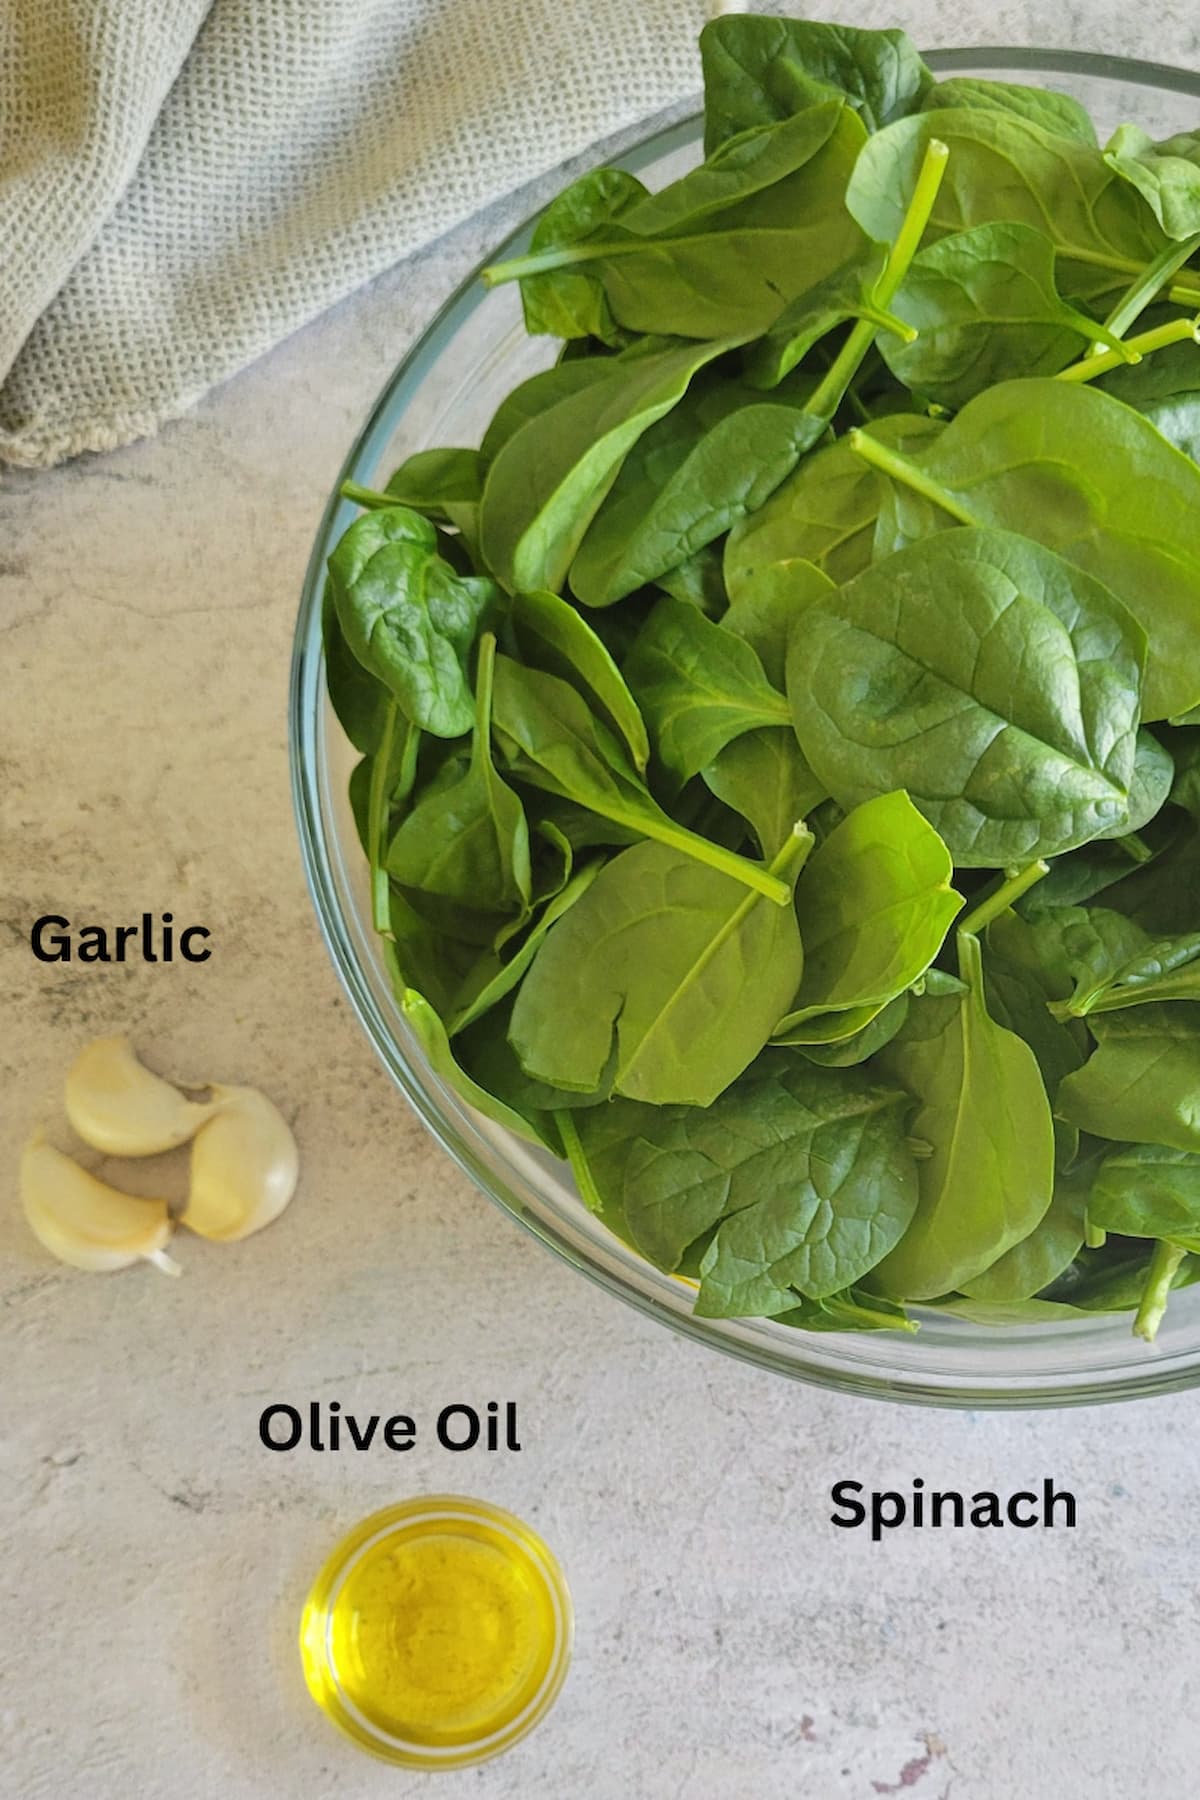 ingredients for sauteed spinach - spinach, garlic, olive oil